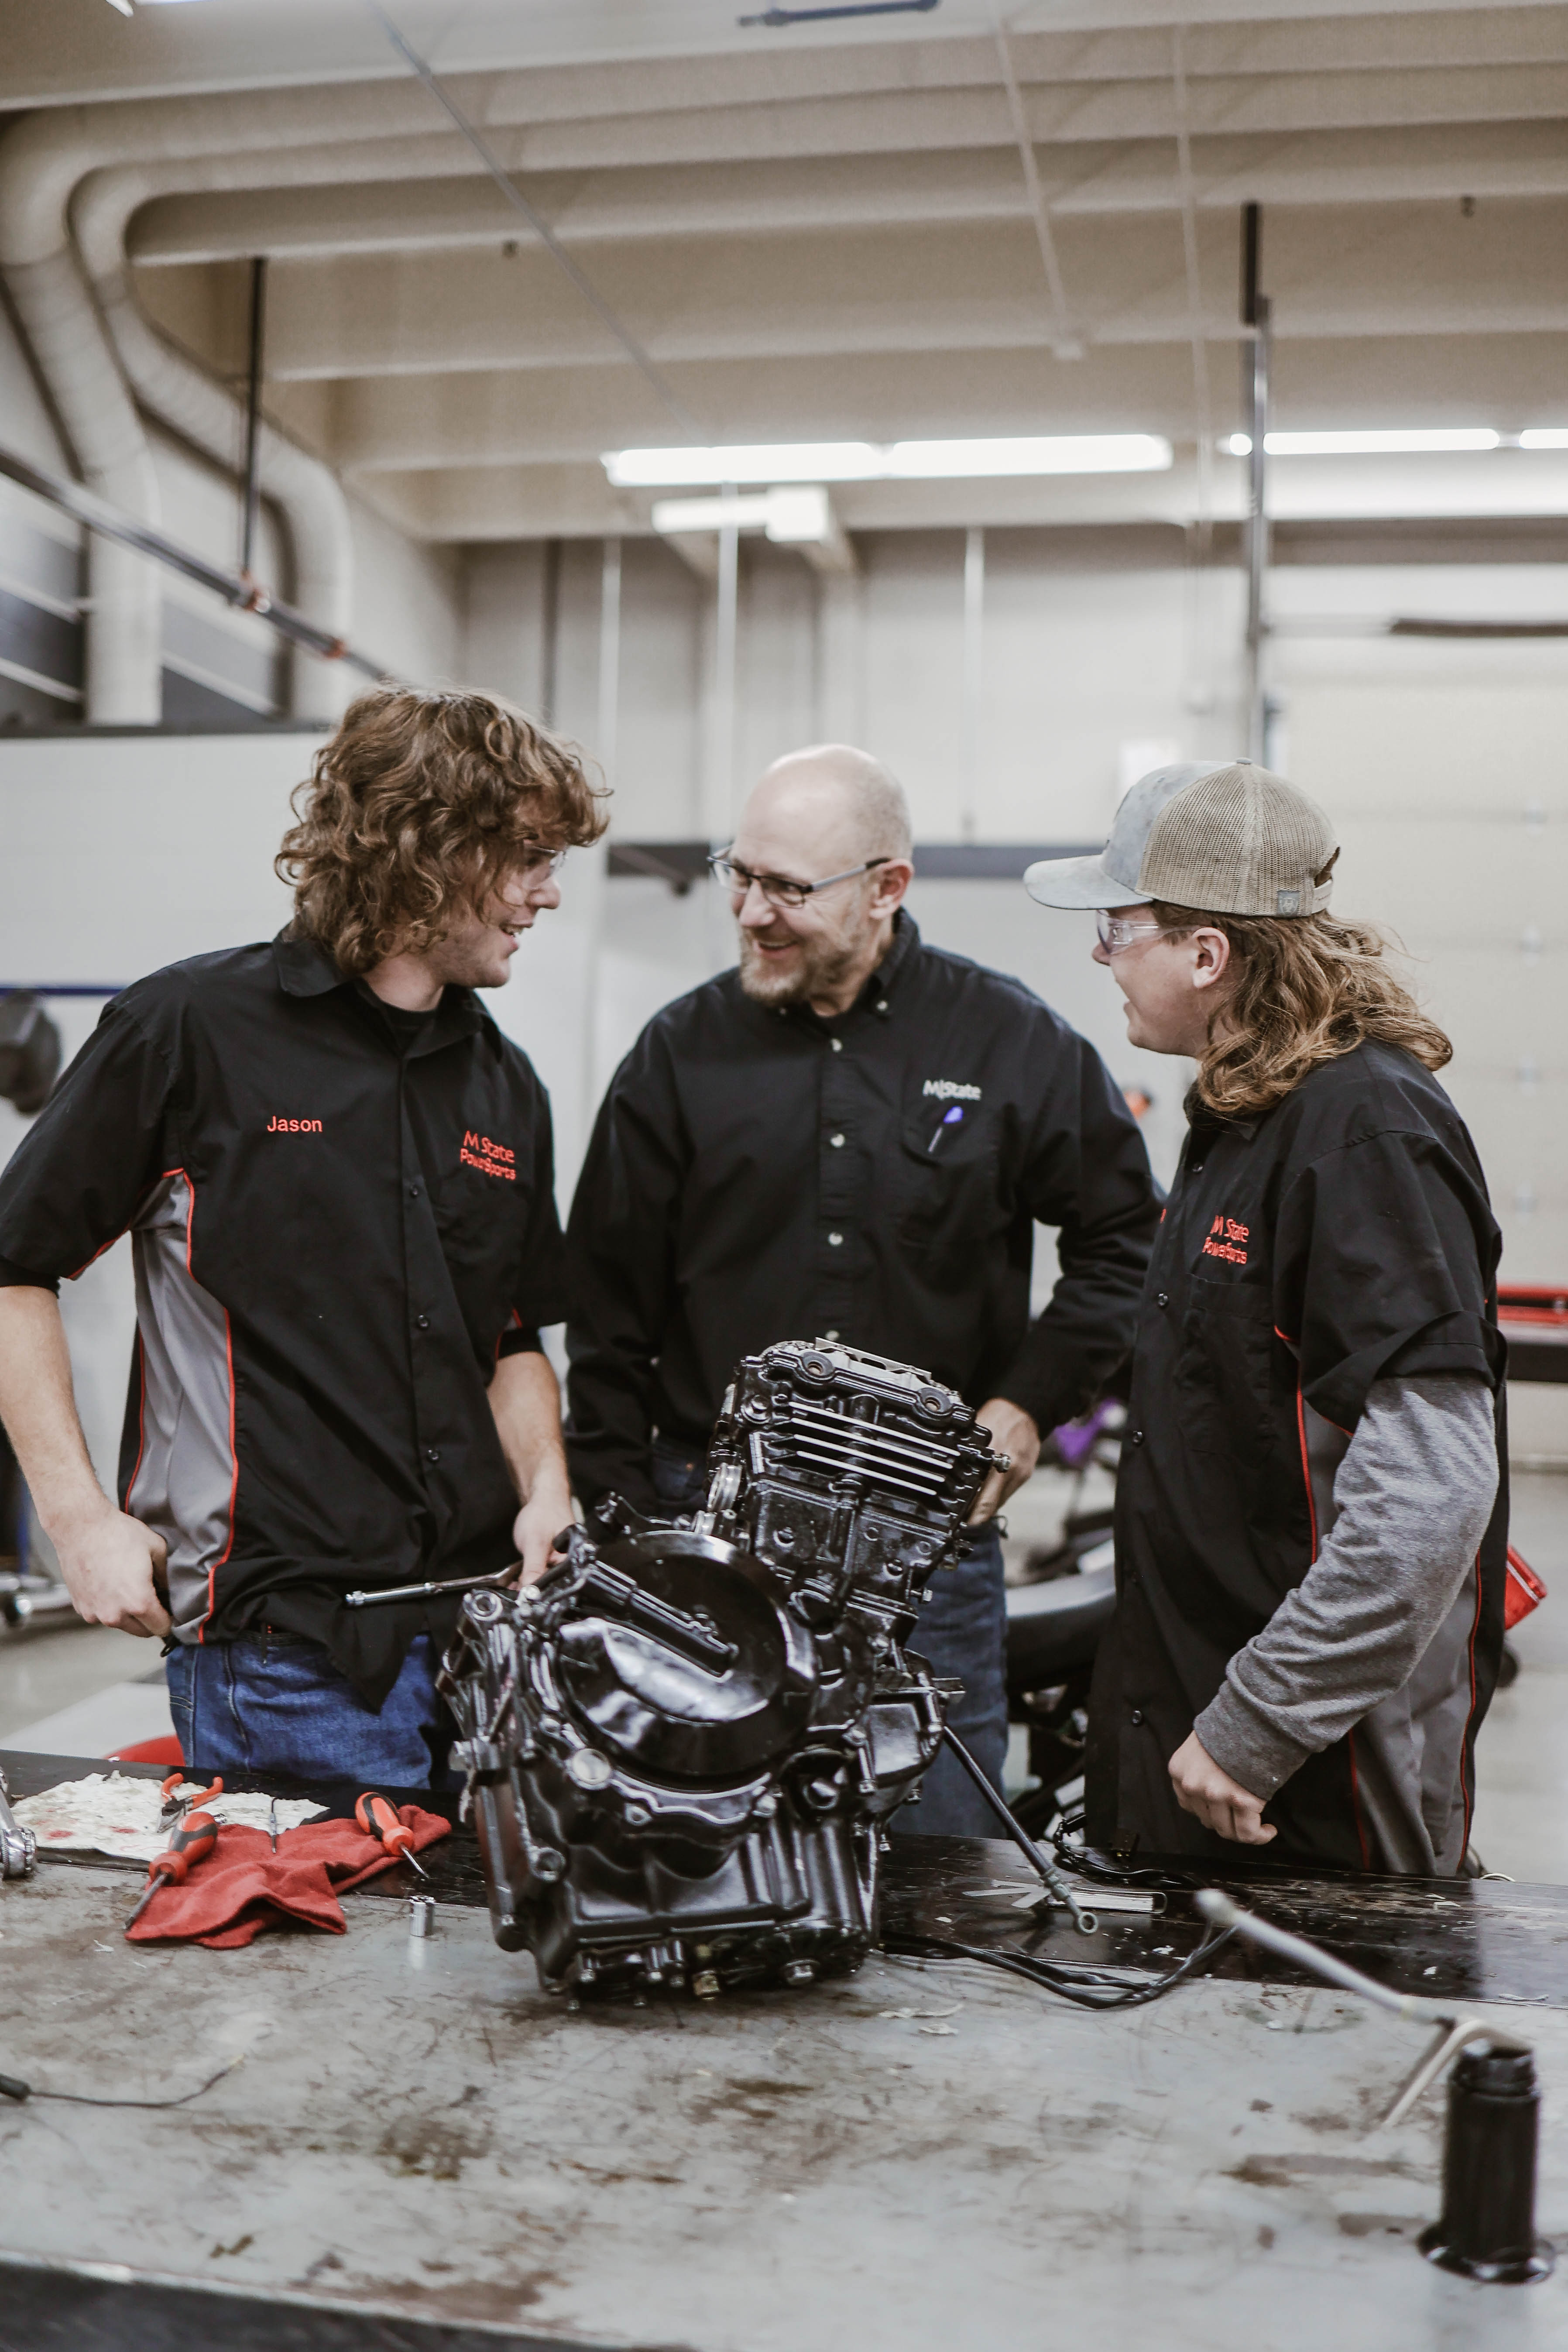 PowerSports instructor Kent Reisenauer, center, laughs with two students during a class in the early 2020s.